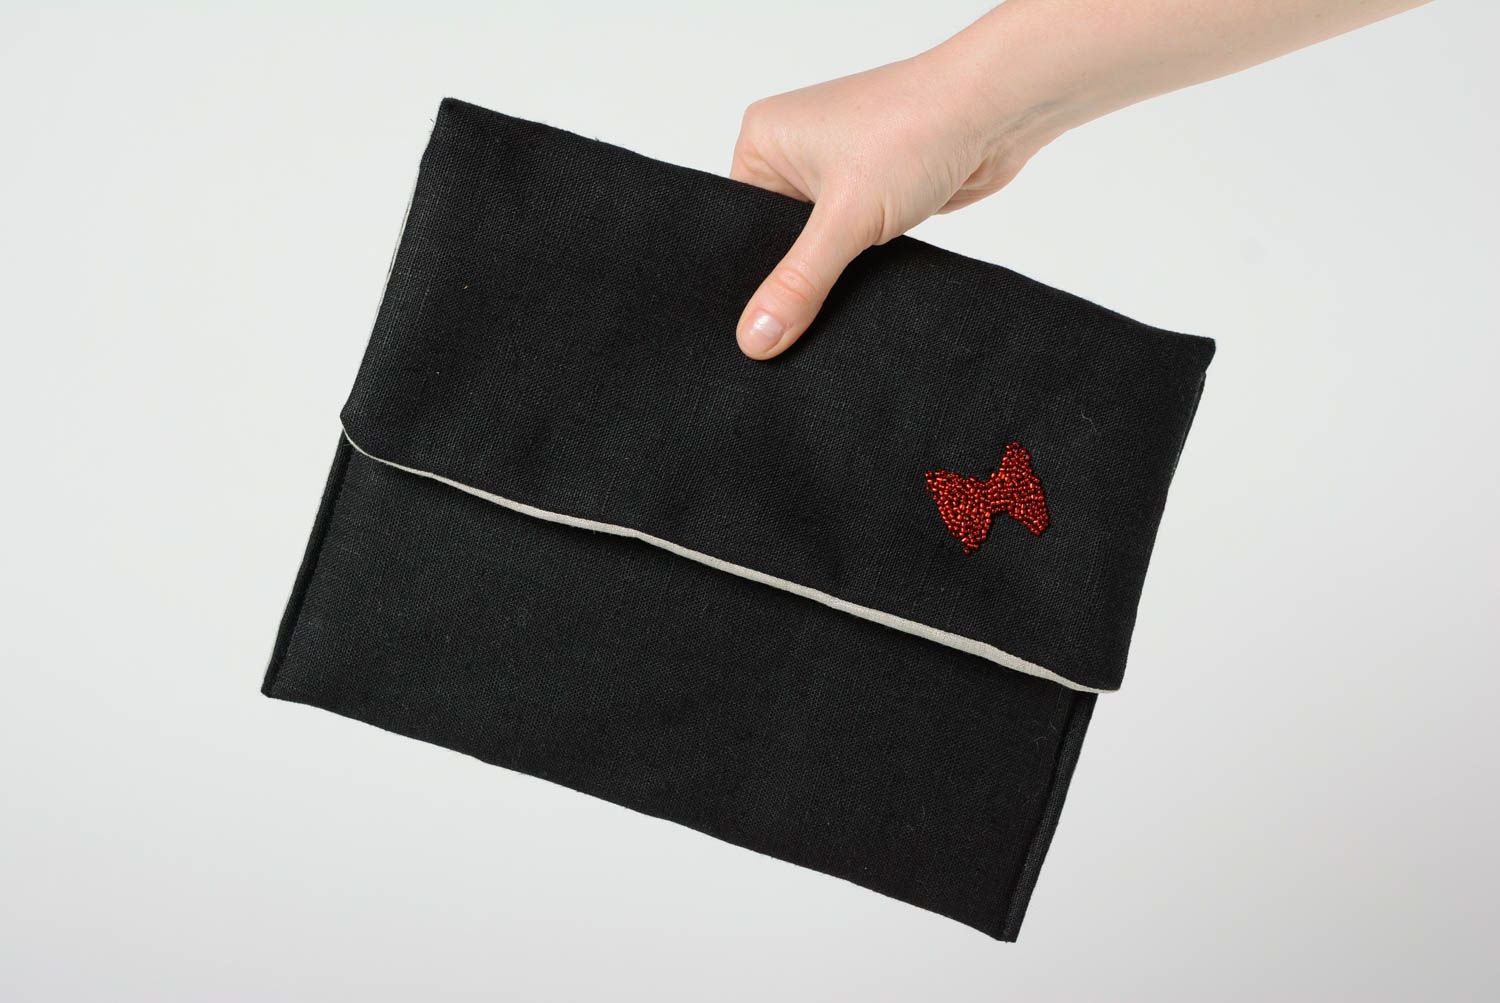 Handmade small black clutch bag sewn of linen fabric with red beaded bow photo 4